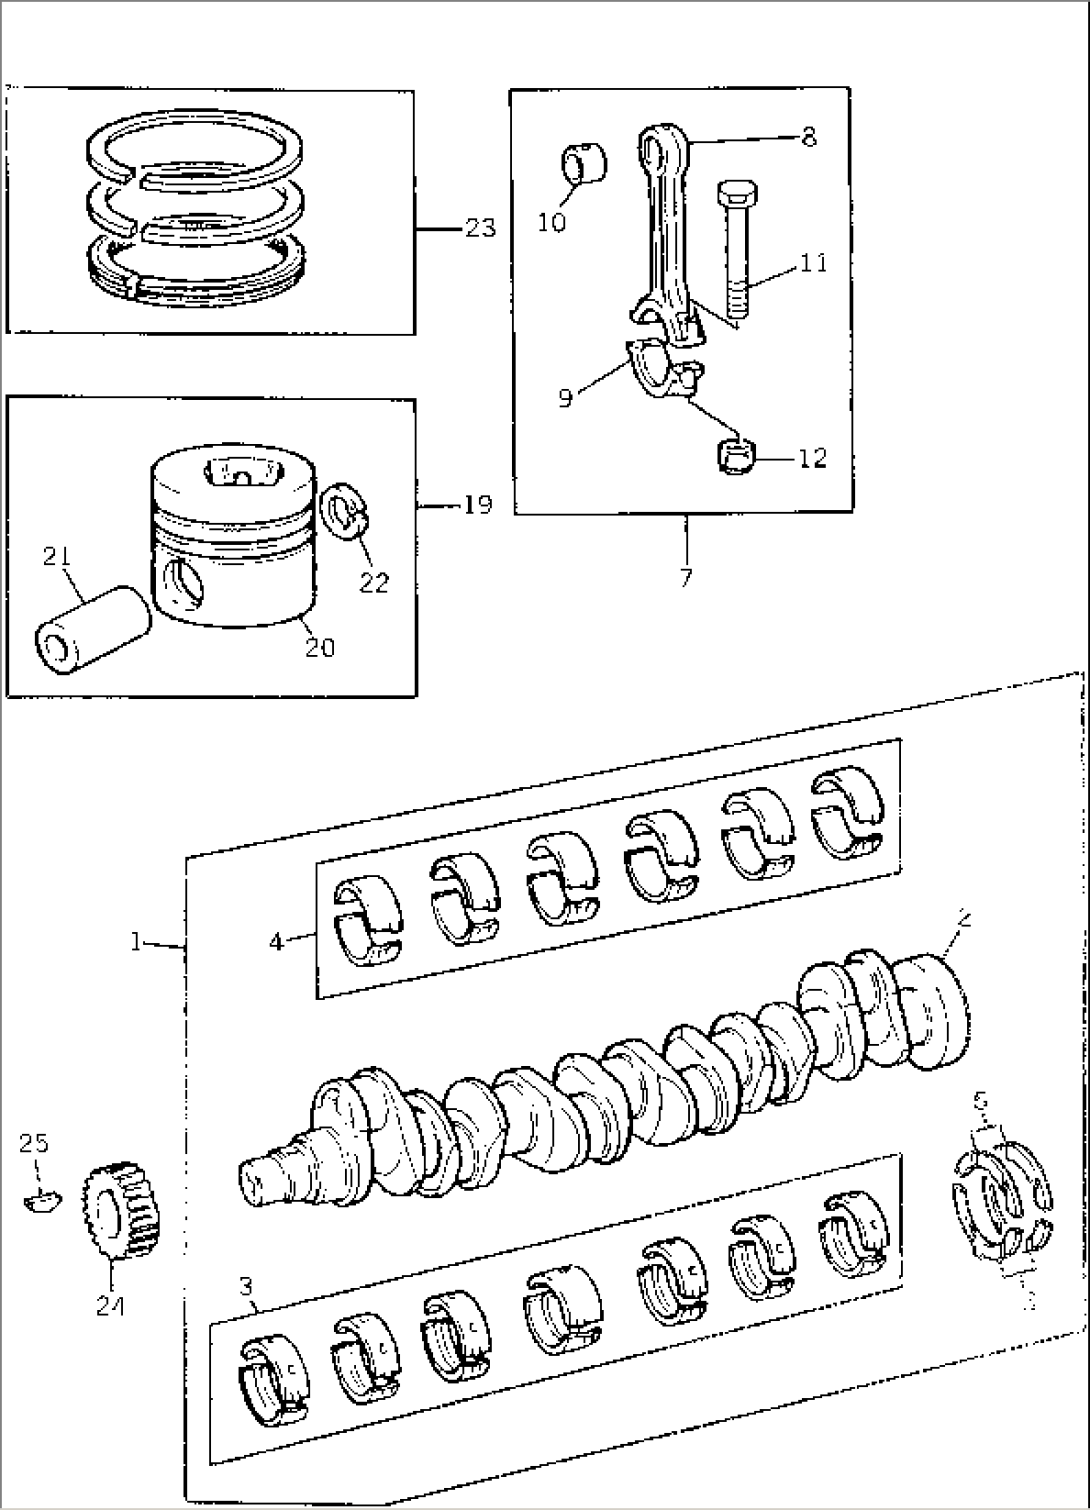 CRANKSHAFT¤ PISTONS AND CONNECTING RODS (1/2)